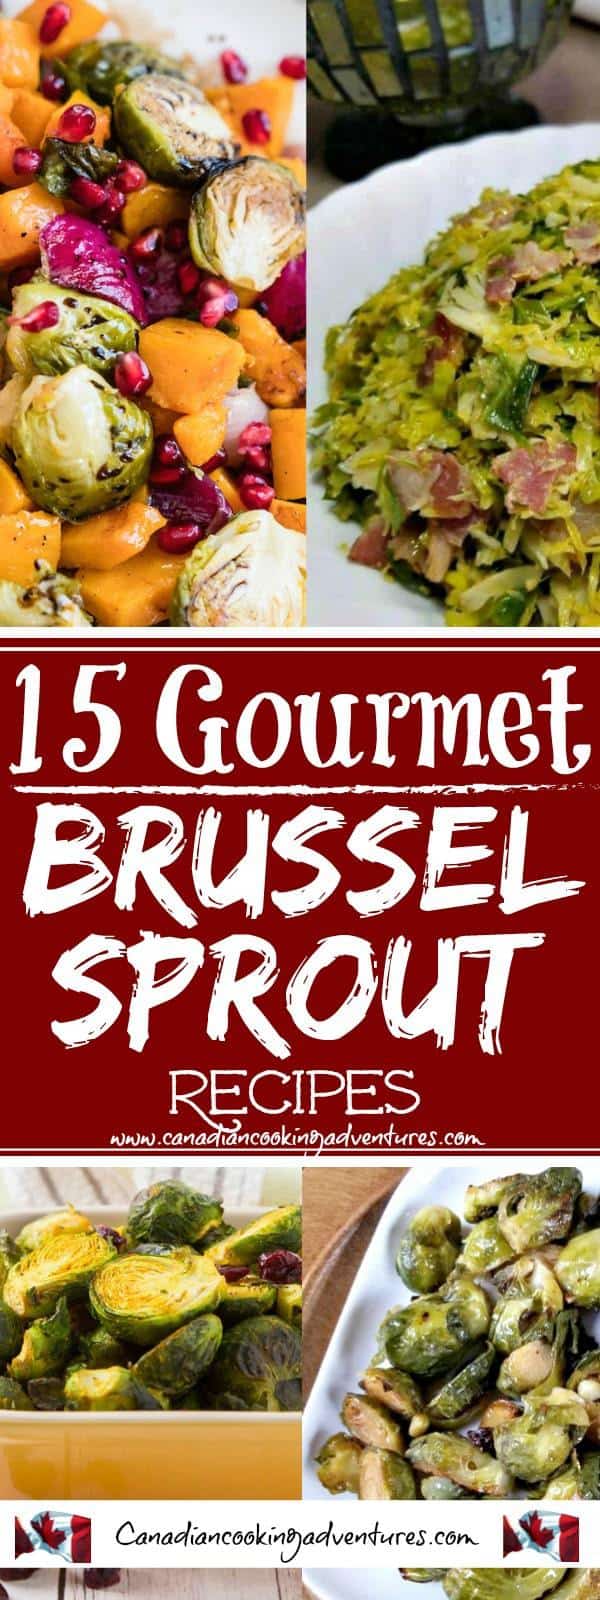 10 Gourmet Brussel Sprouts Recipes